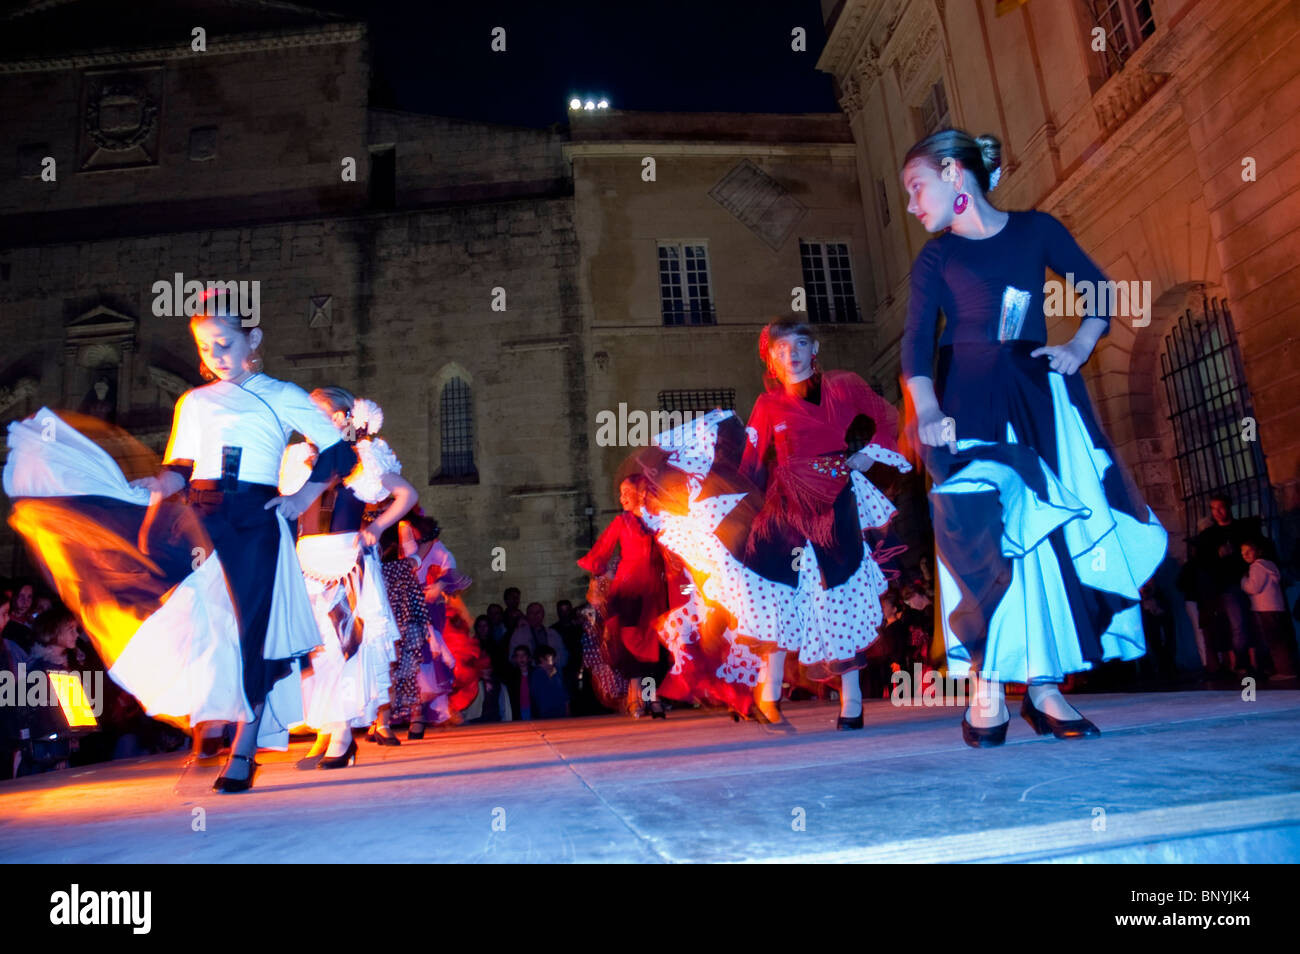 Arles, France, Feria 'Bullfighting Festival' Andalusian Women Performing on Stage Flamenco Dance in Costume, group teenagers  dancing outdoors people Stock Photo